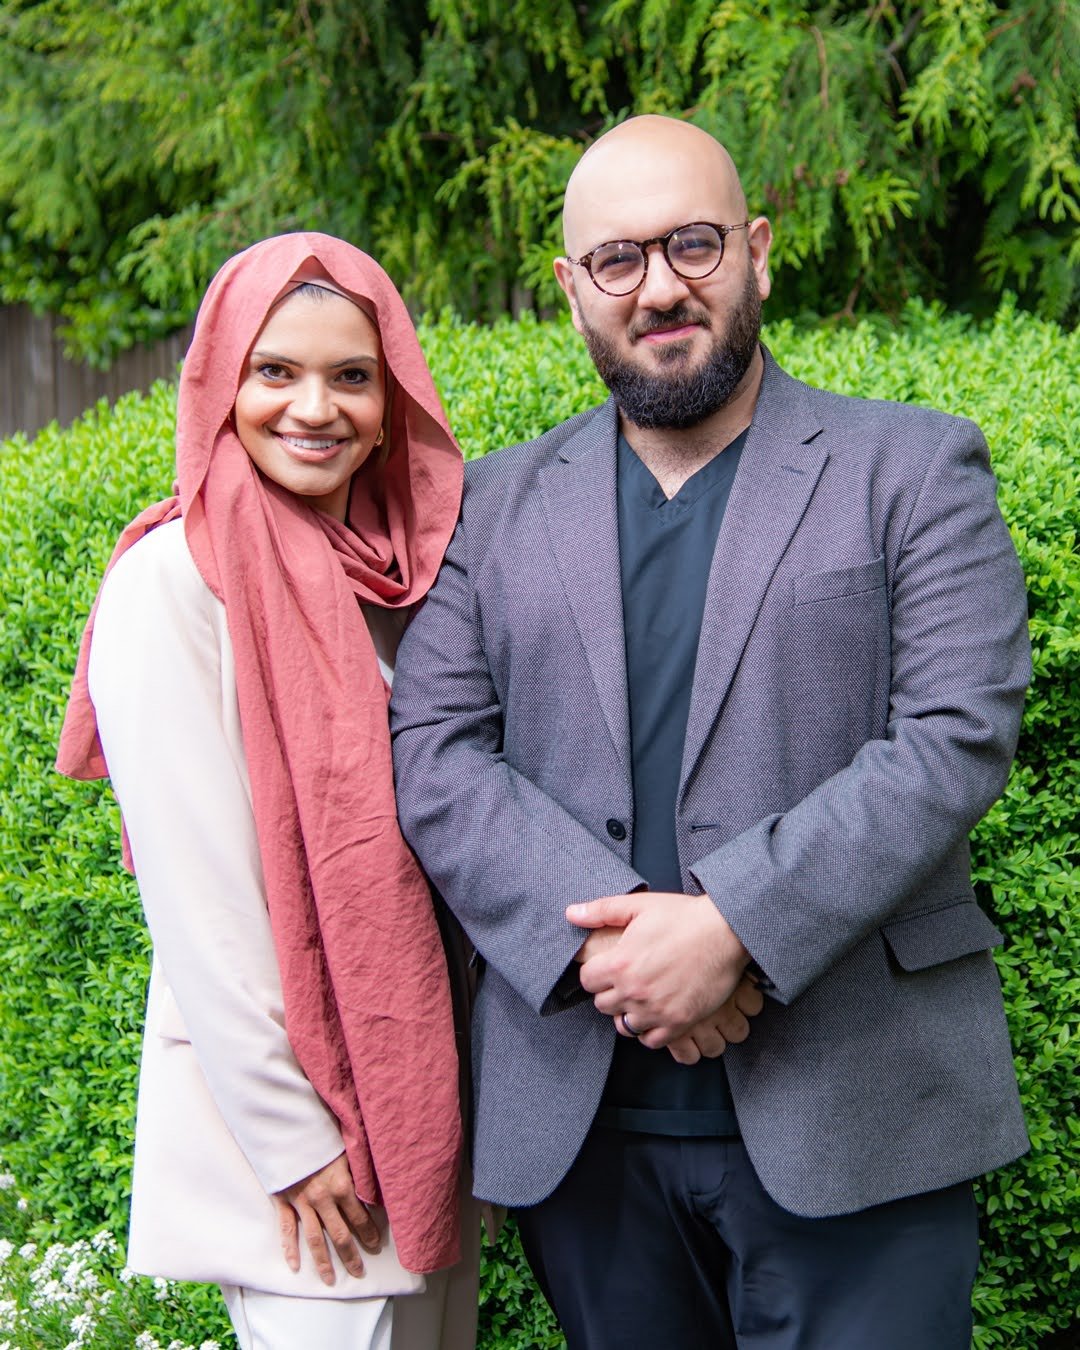 Meet Dr. Noor &amp; Dr. Mustafa, the dynamic duo behind ALMĀS. Dr. Noor, a biological dentist and certified barre instructor, combines holistic wisdom with cutting-edge technology like the Fotona laser and Advanced PRF treatments to deliver all-natur